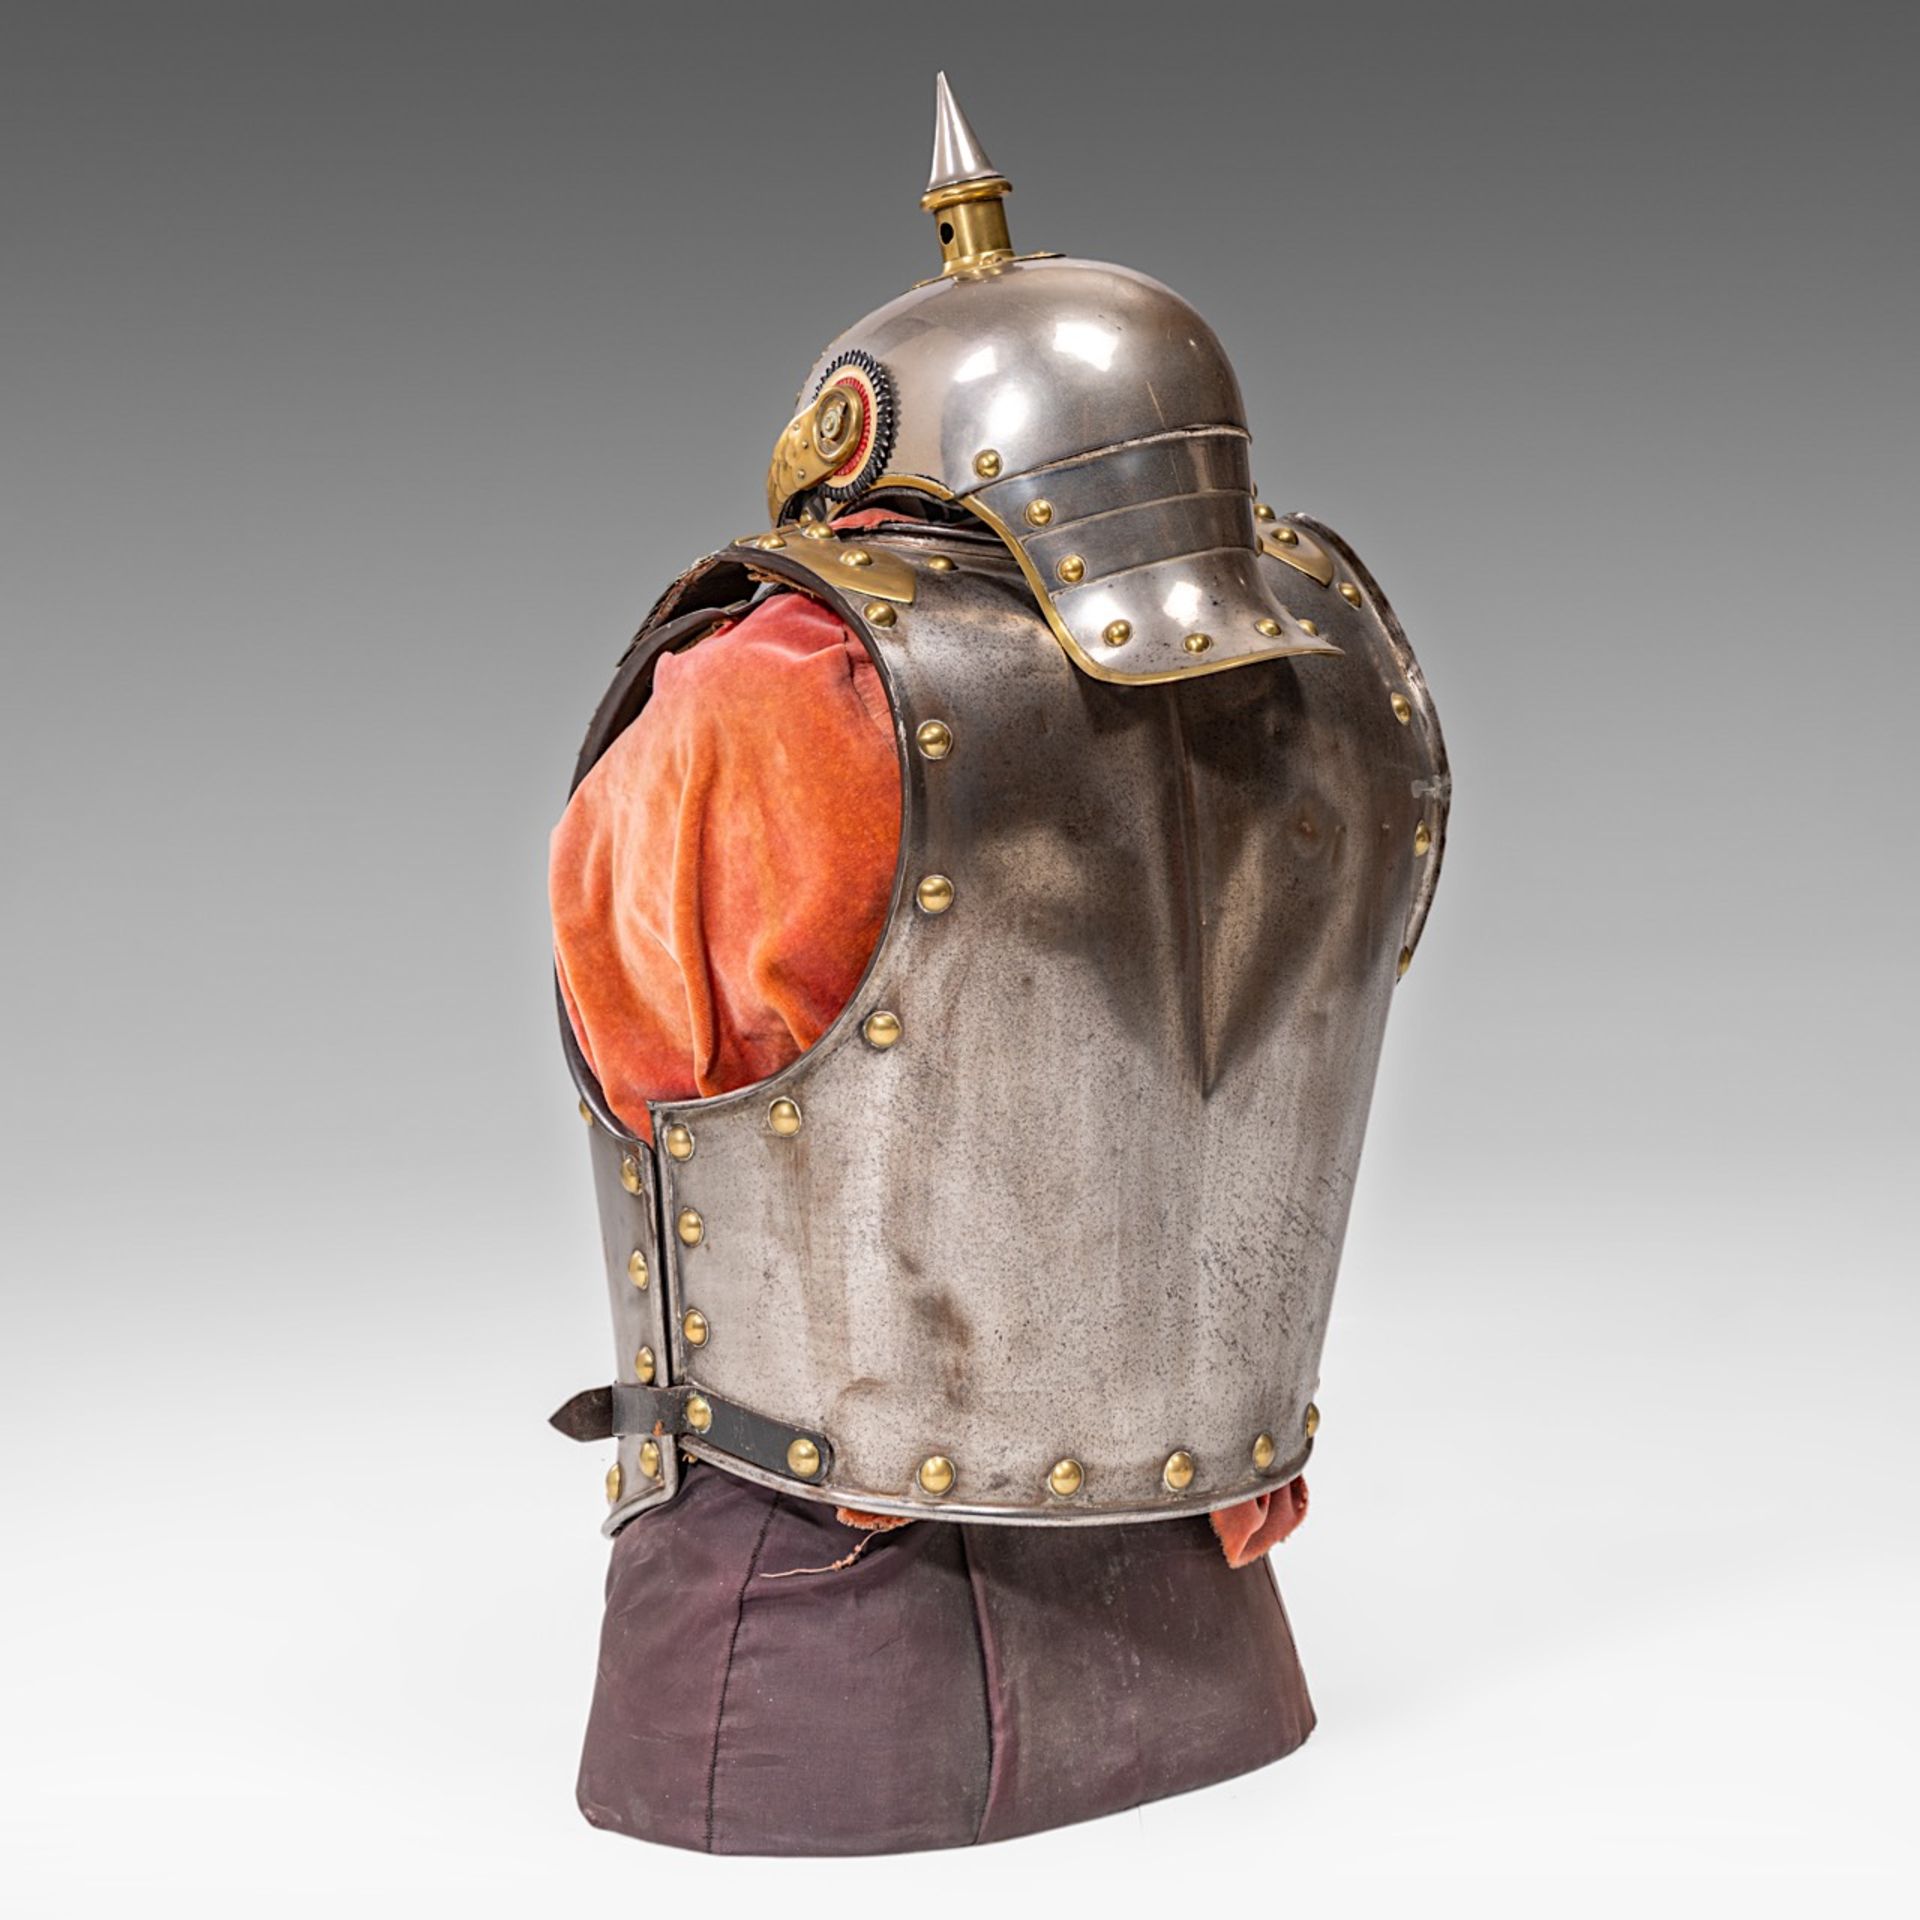 Cuirass and helmet, metal and gilded brass, 19thC., 68 x 30 x 36 cm. (26.7 x 11.8 x 14.1 in.) - Image 4 of 8